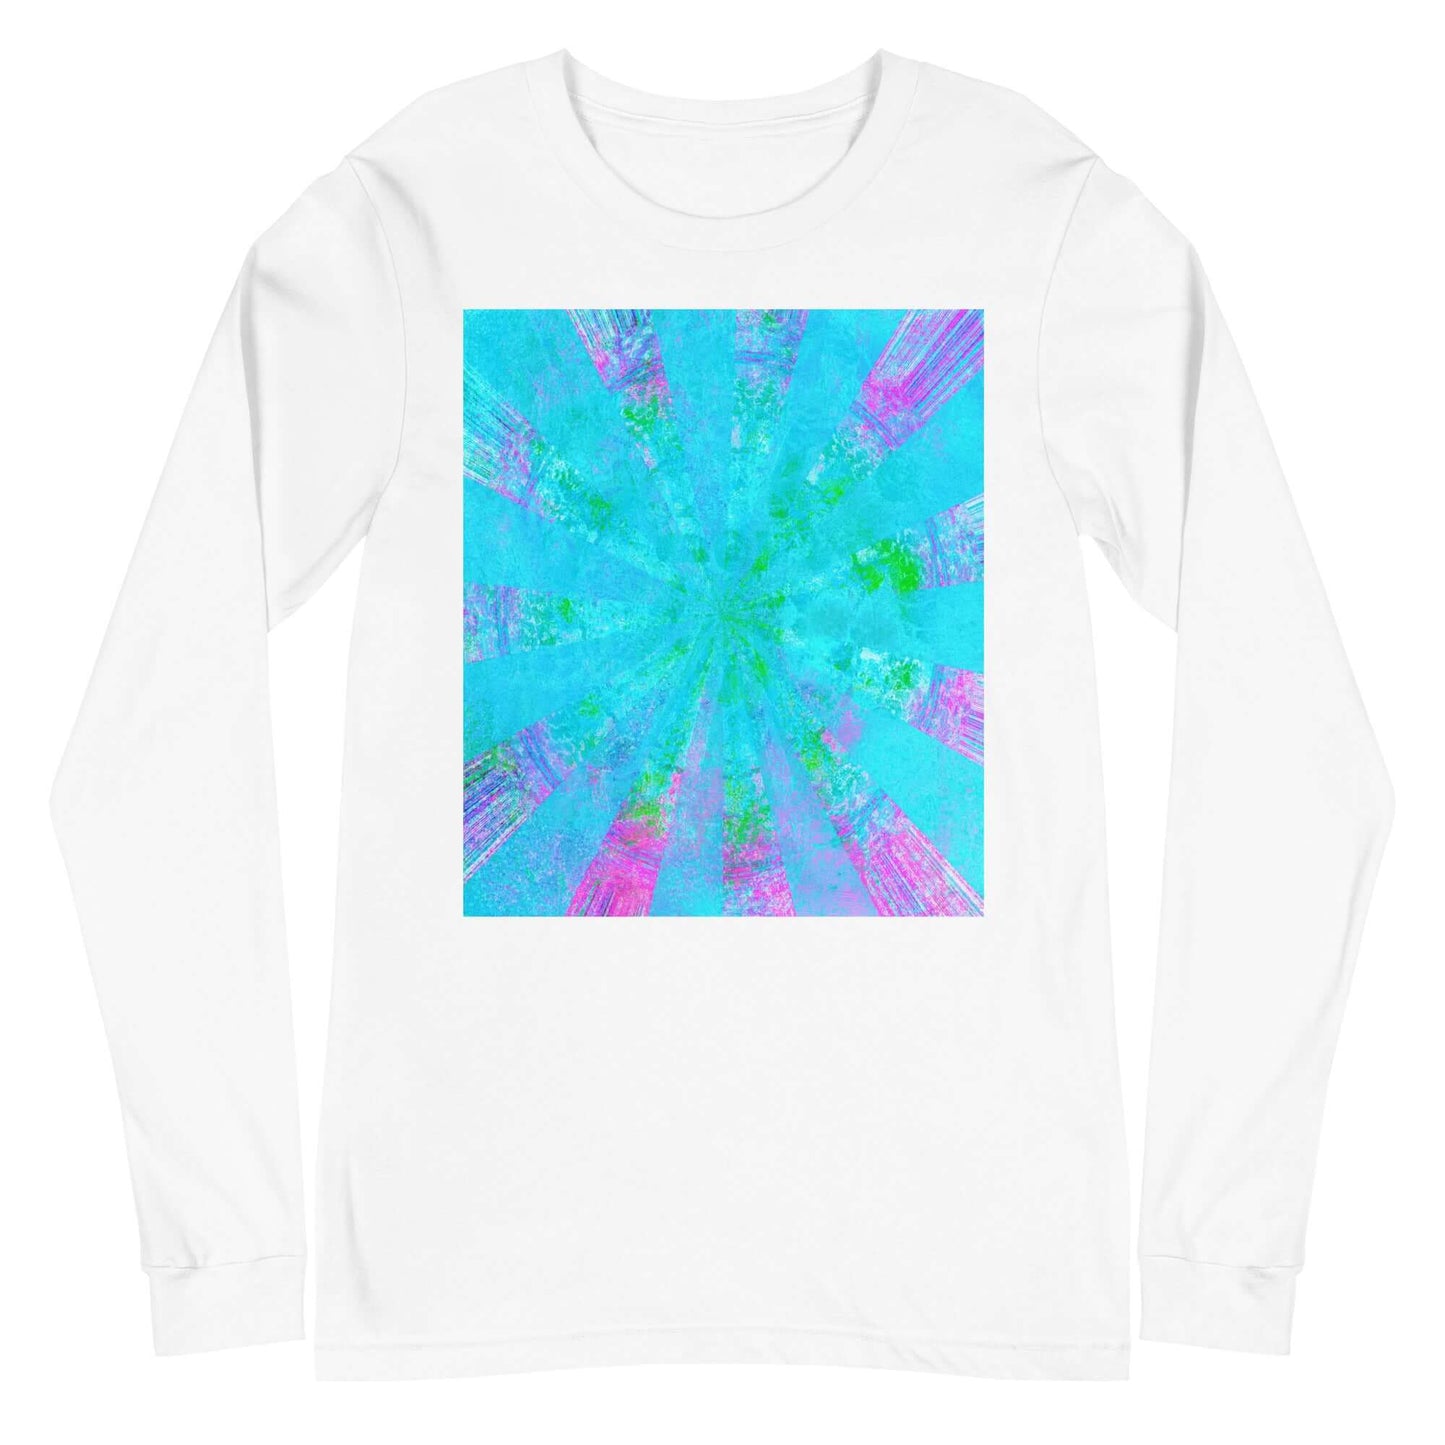 Turquoise Blue with Purple Radial Abstract Art “Blue Stingray” Unisex Long Sleeve Tee in White